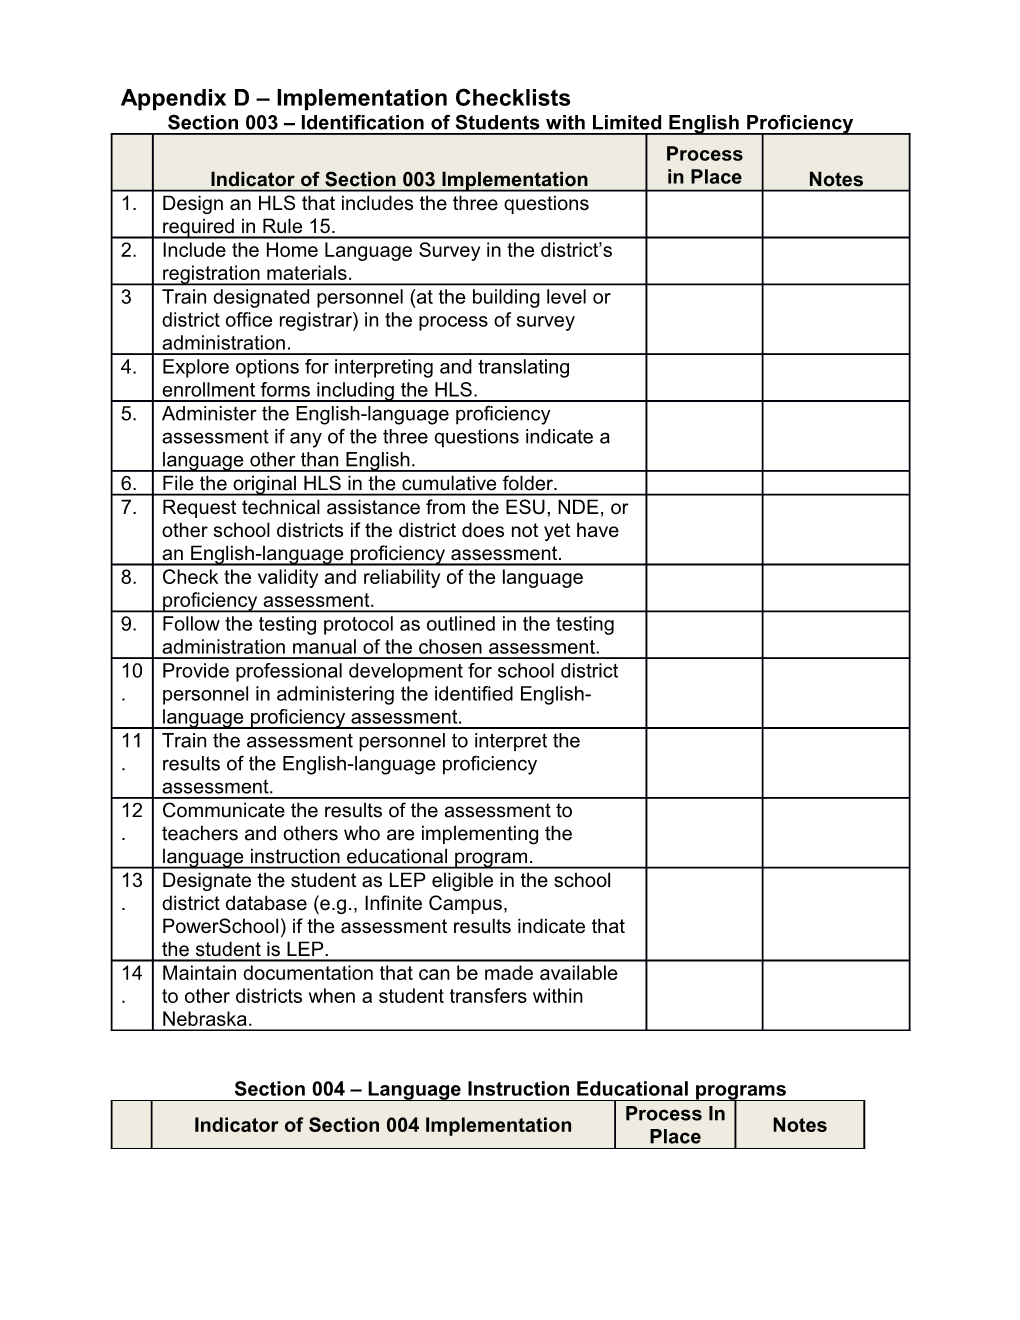 Section 003 Identification of Students with Limited English Proficiency